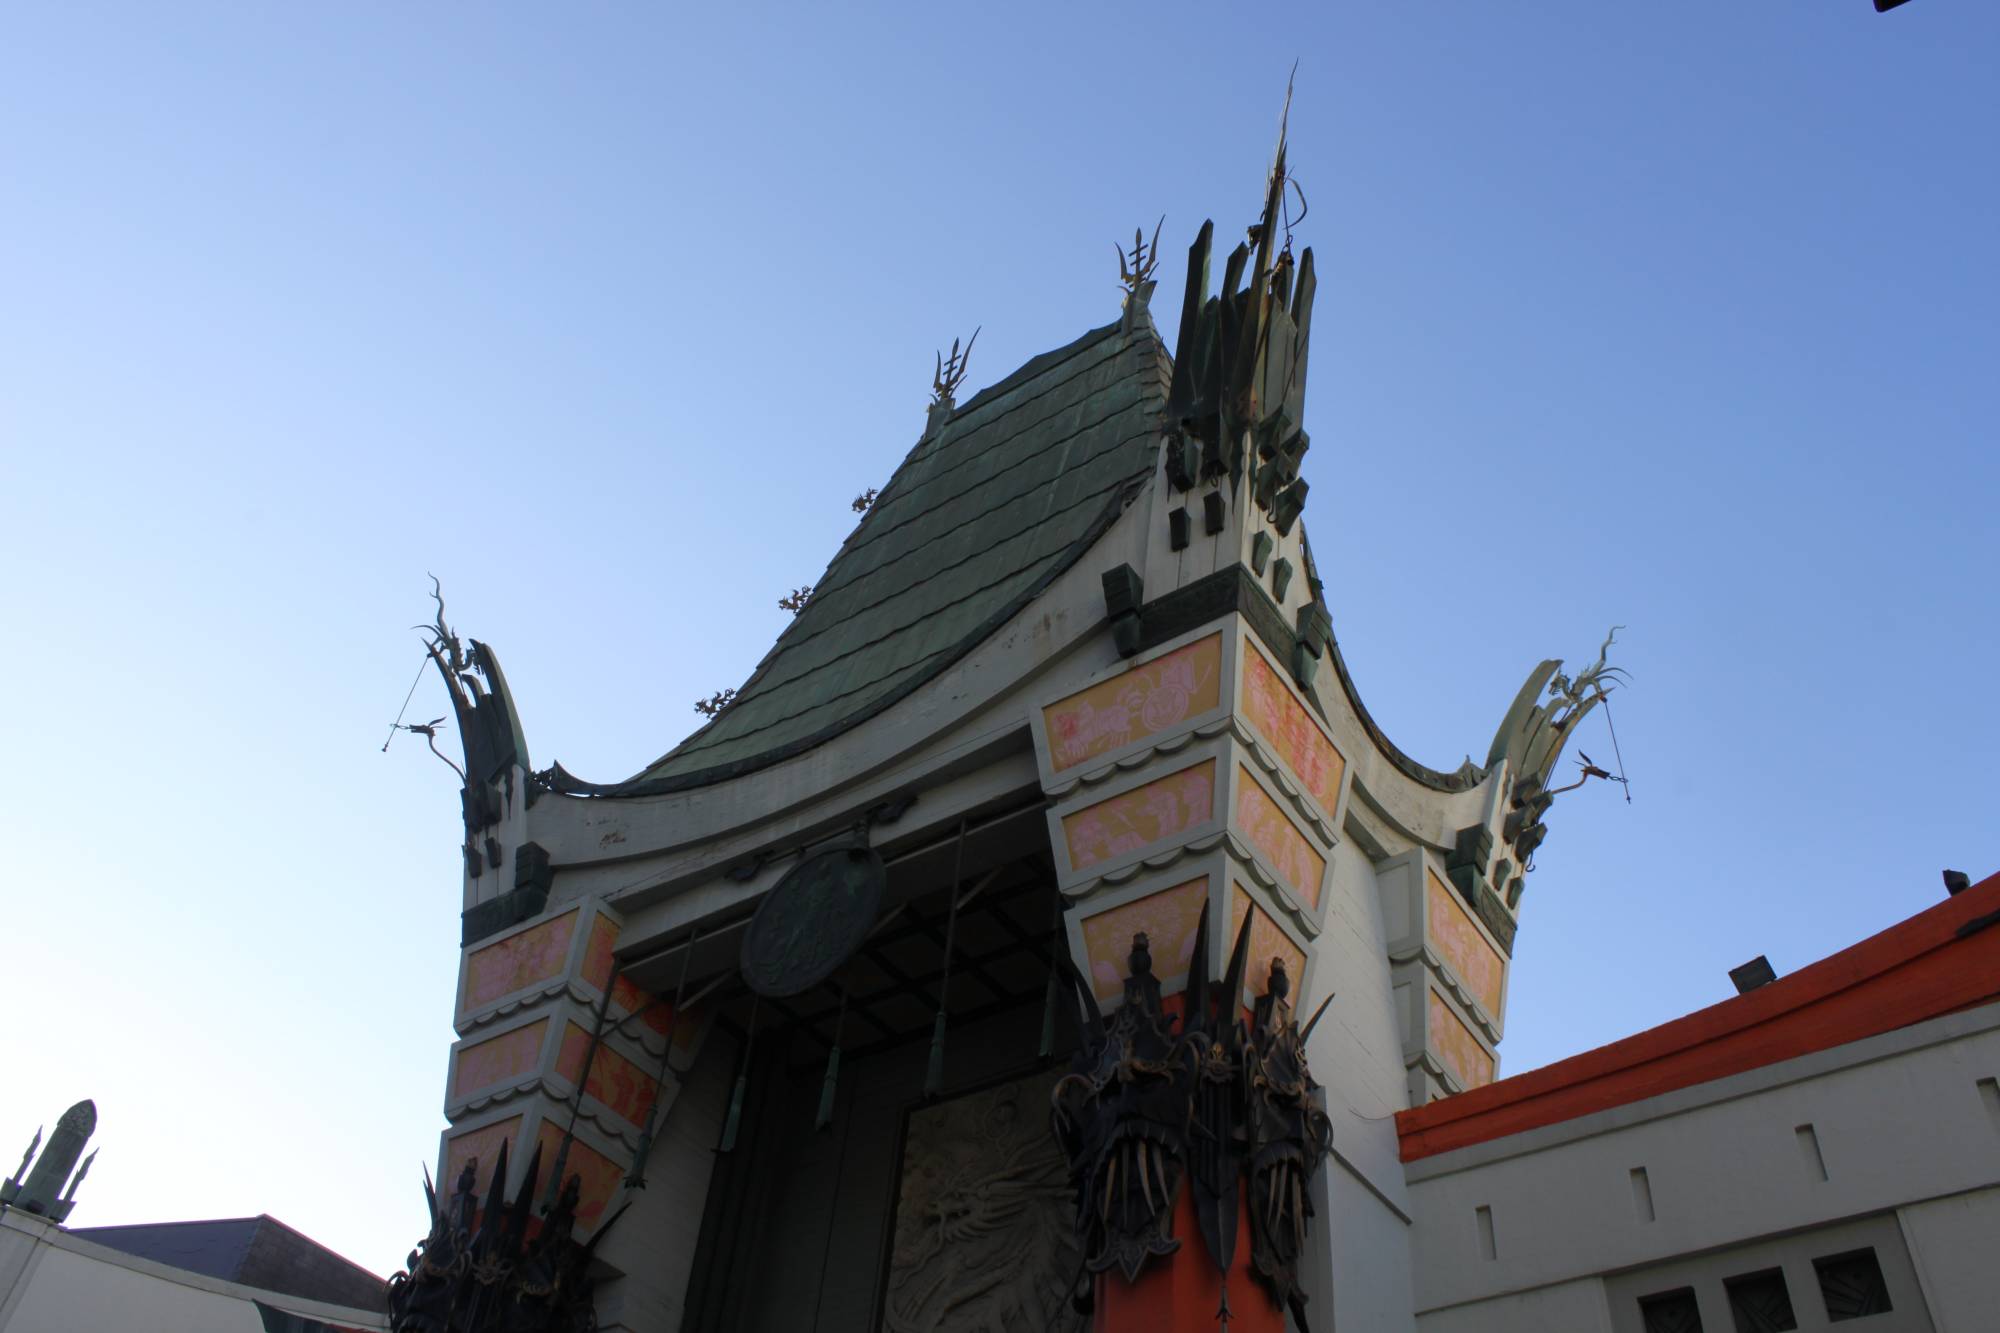 Grauman's Chinese Theater - Hollywood